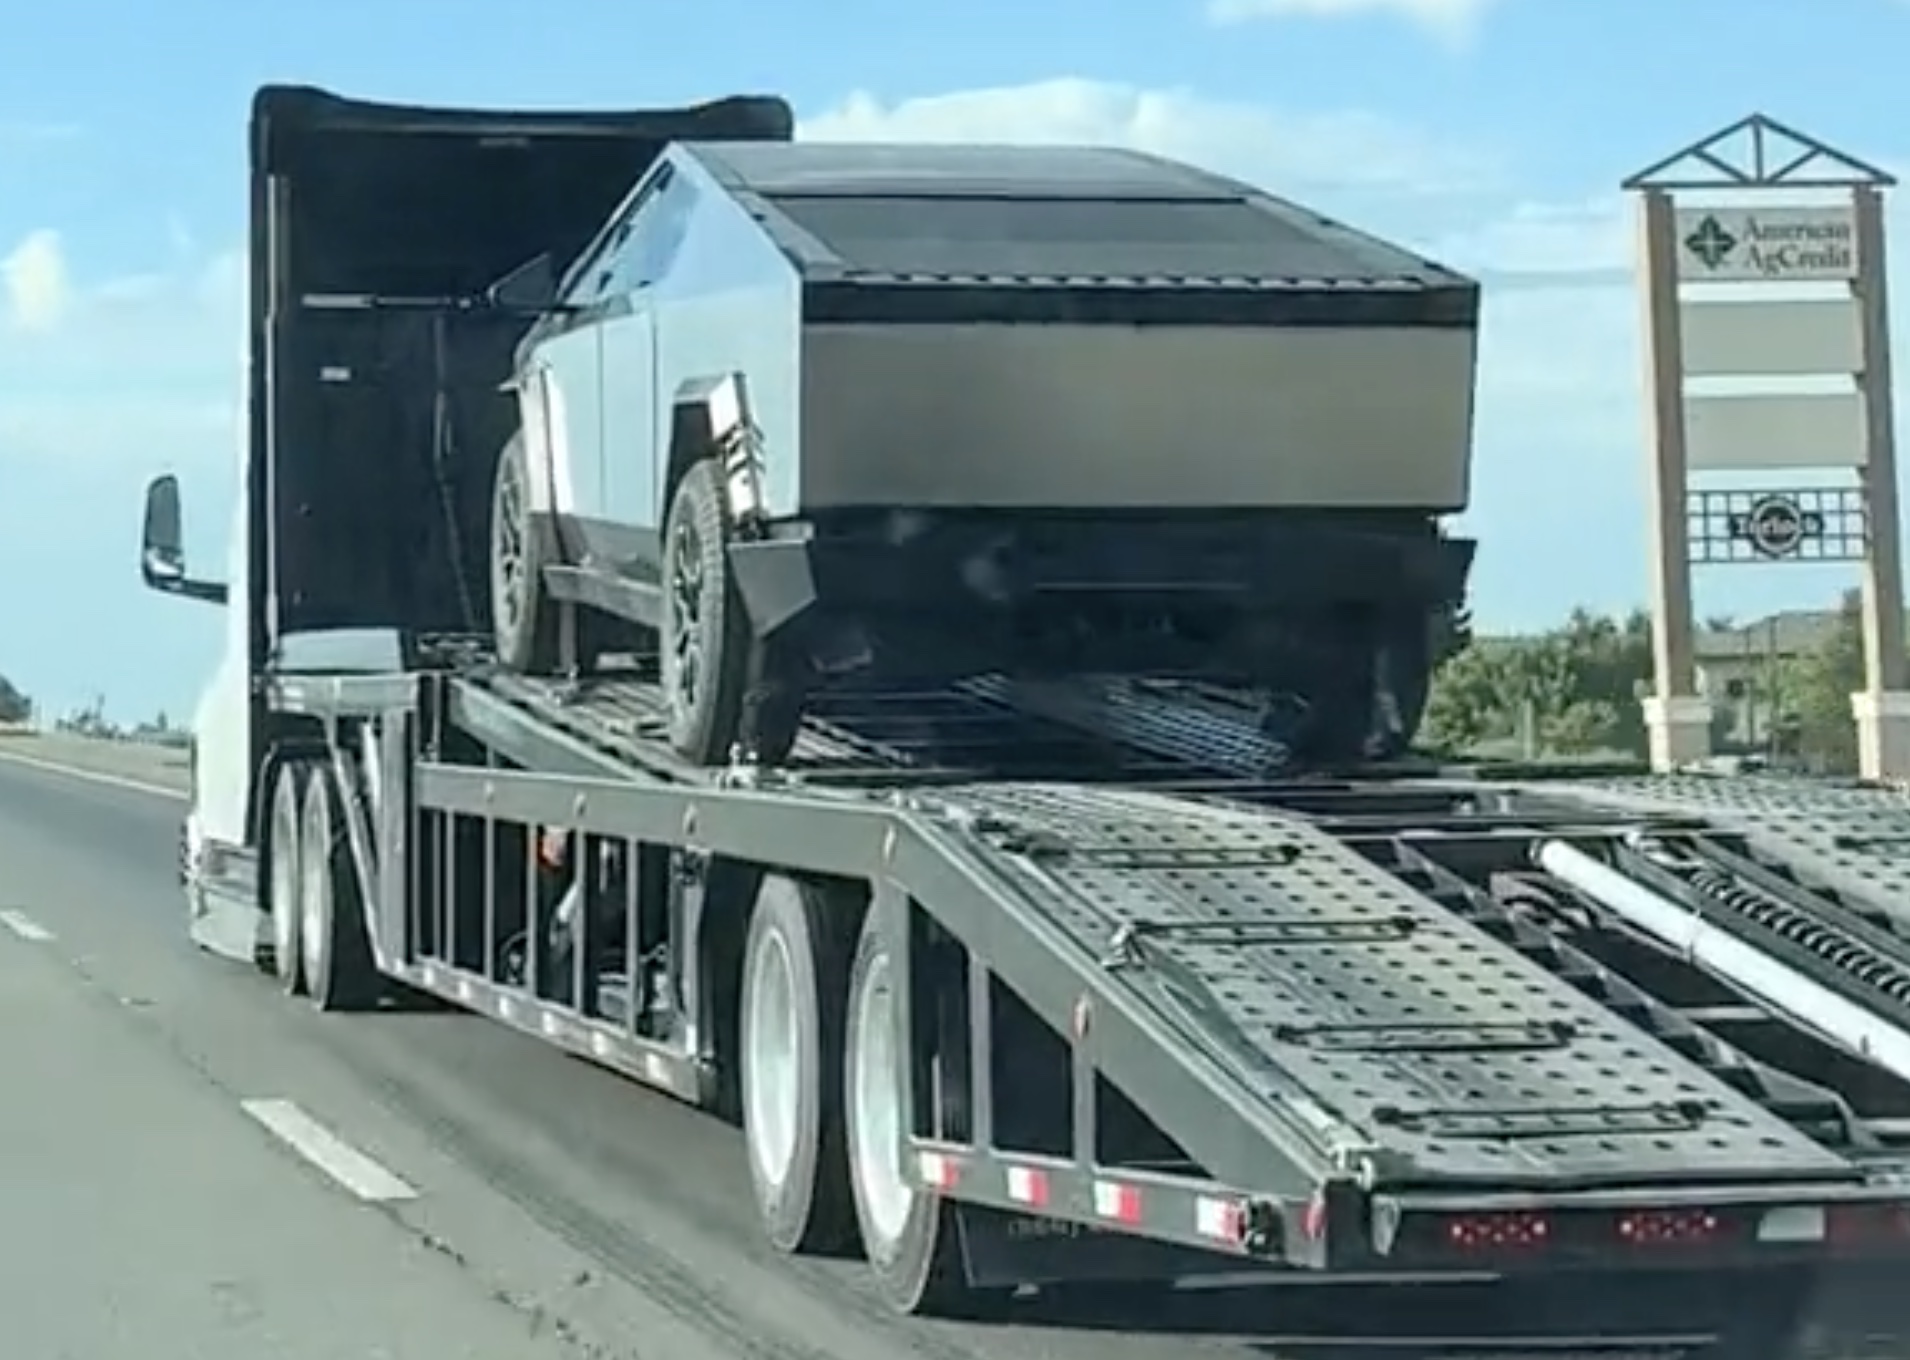 Tesla Semi spotted transporting the Cybertruck for the first time